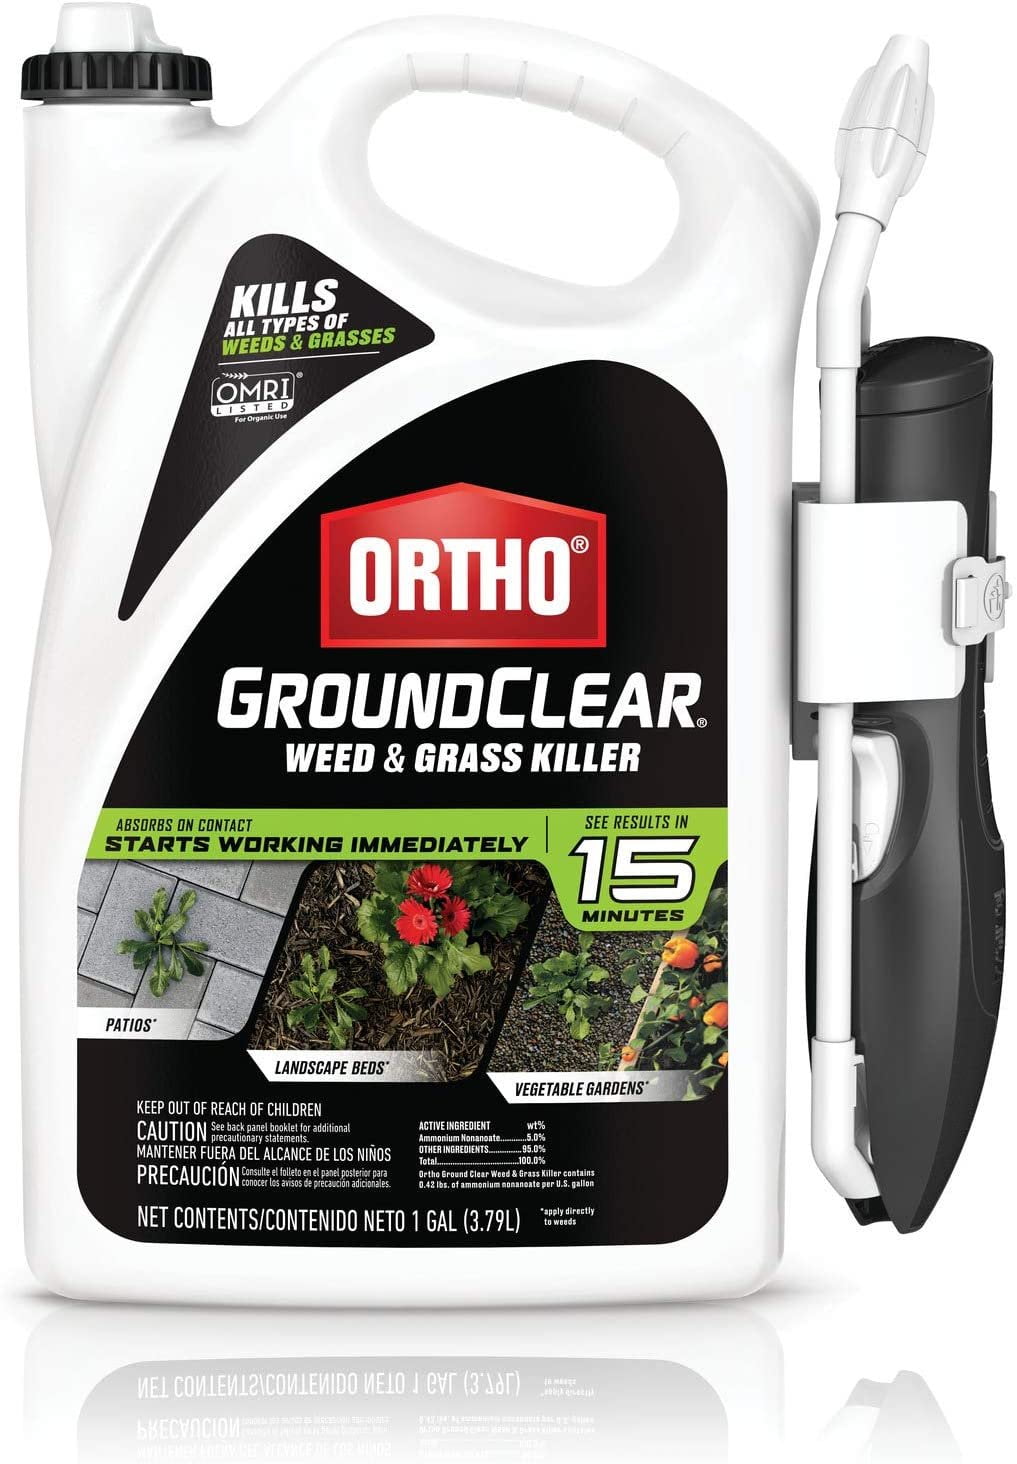 Image of Ortho Groundclear weed and grass killer sprayer